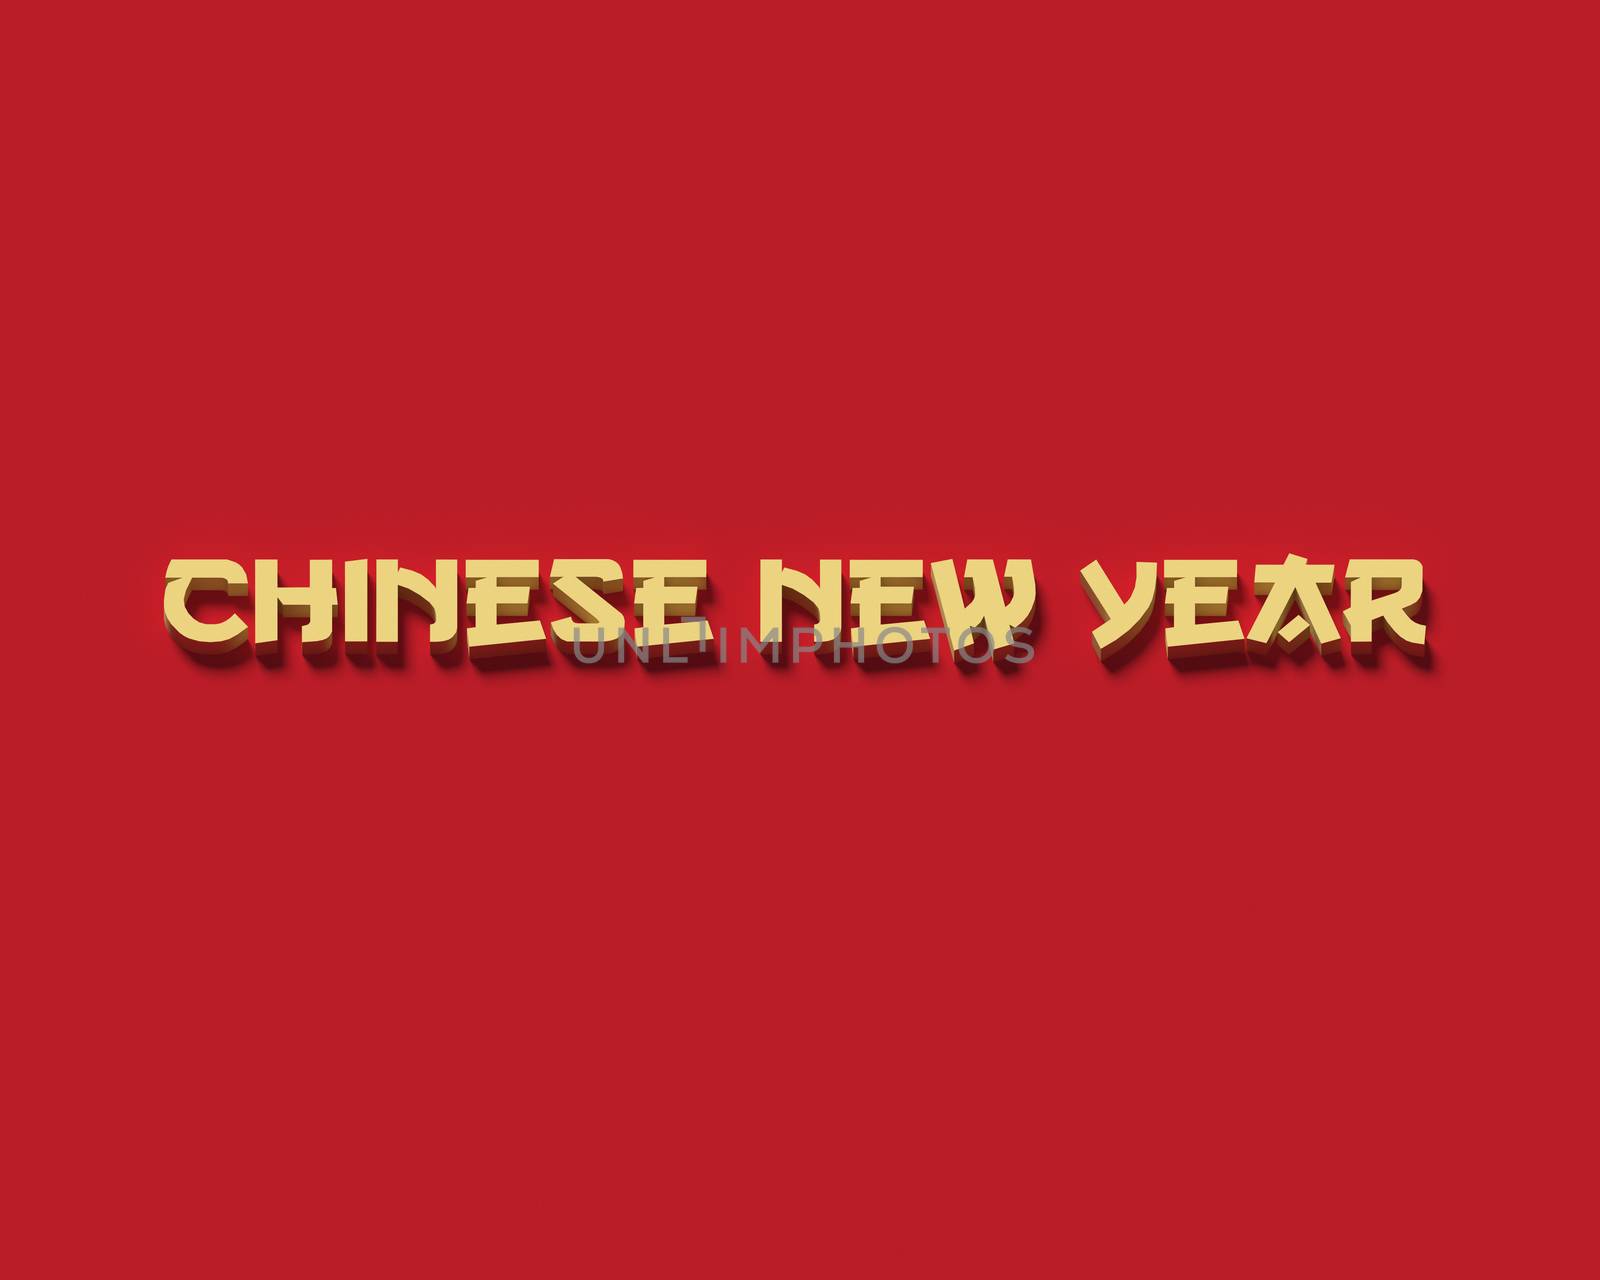 COLOR PHOTO OF 3D WORDS 'CHINESE NEW YEAR' ON PLAIN BACKGROUND